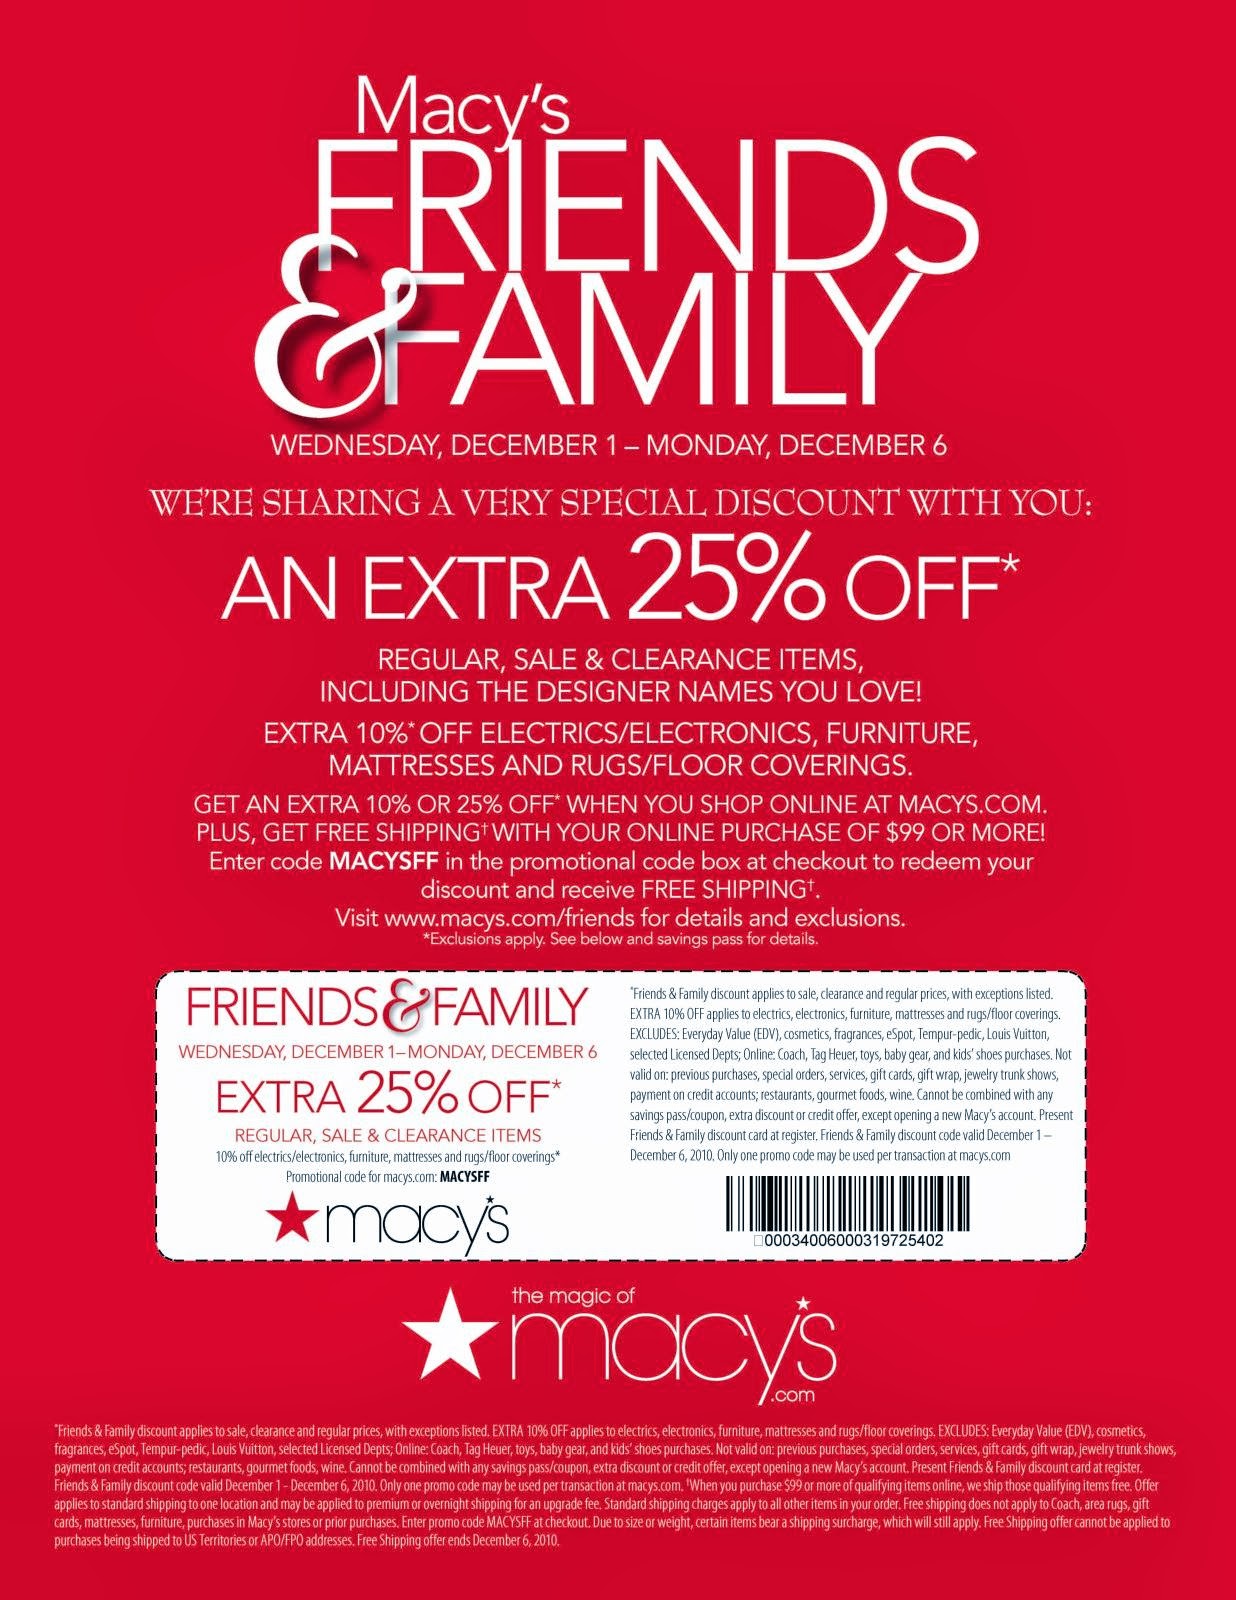 15% Macy's Printable Coupon you must Sign Up